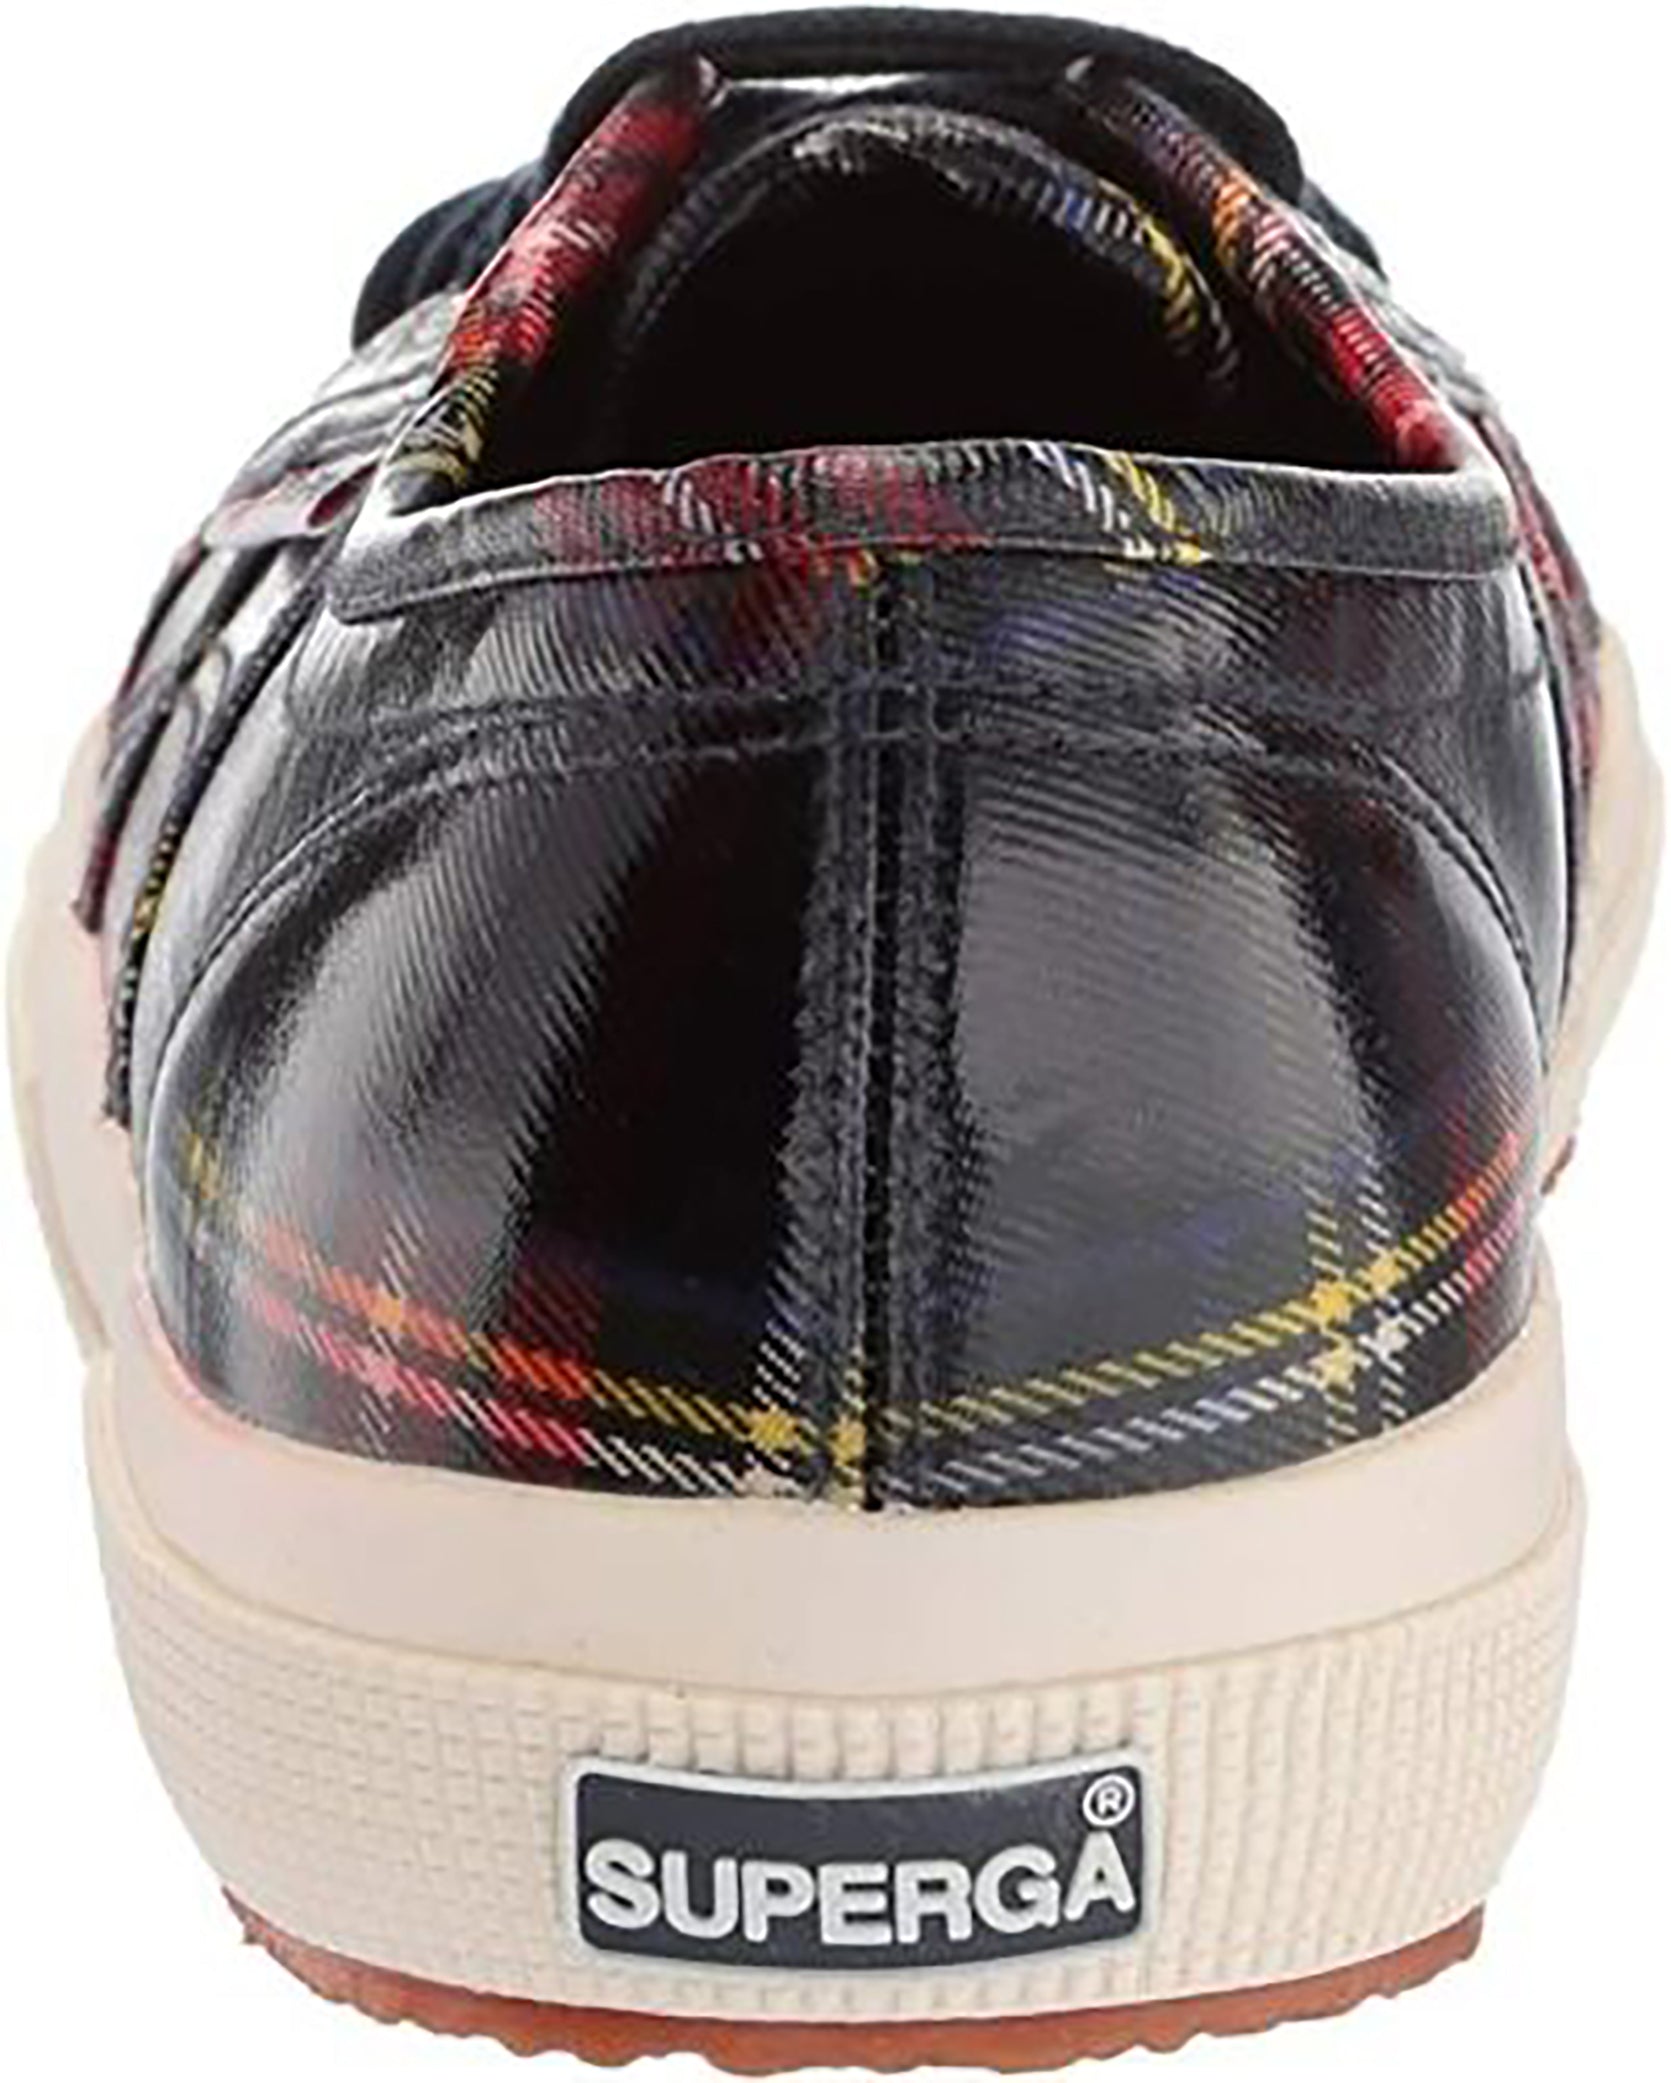 A rear view of a Superga 2750 Red Tartan Plaid sneaker featuring a checkered pattern and a glossy finish, highlighting the brand's loop signature tag on the heel tab.